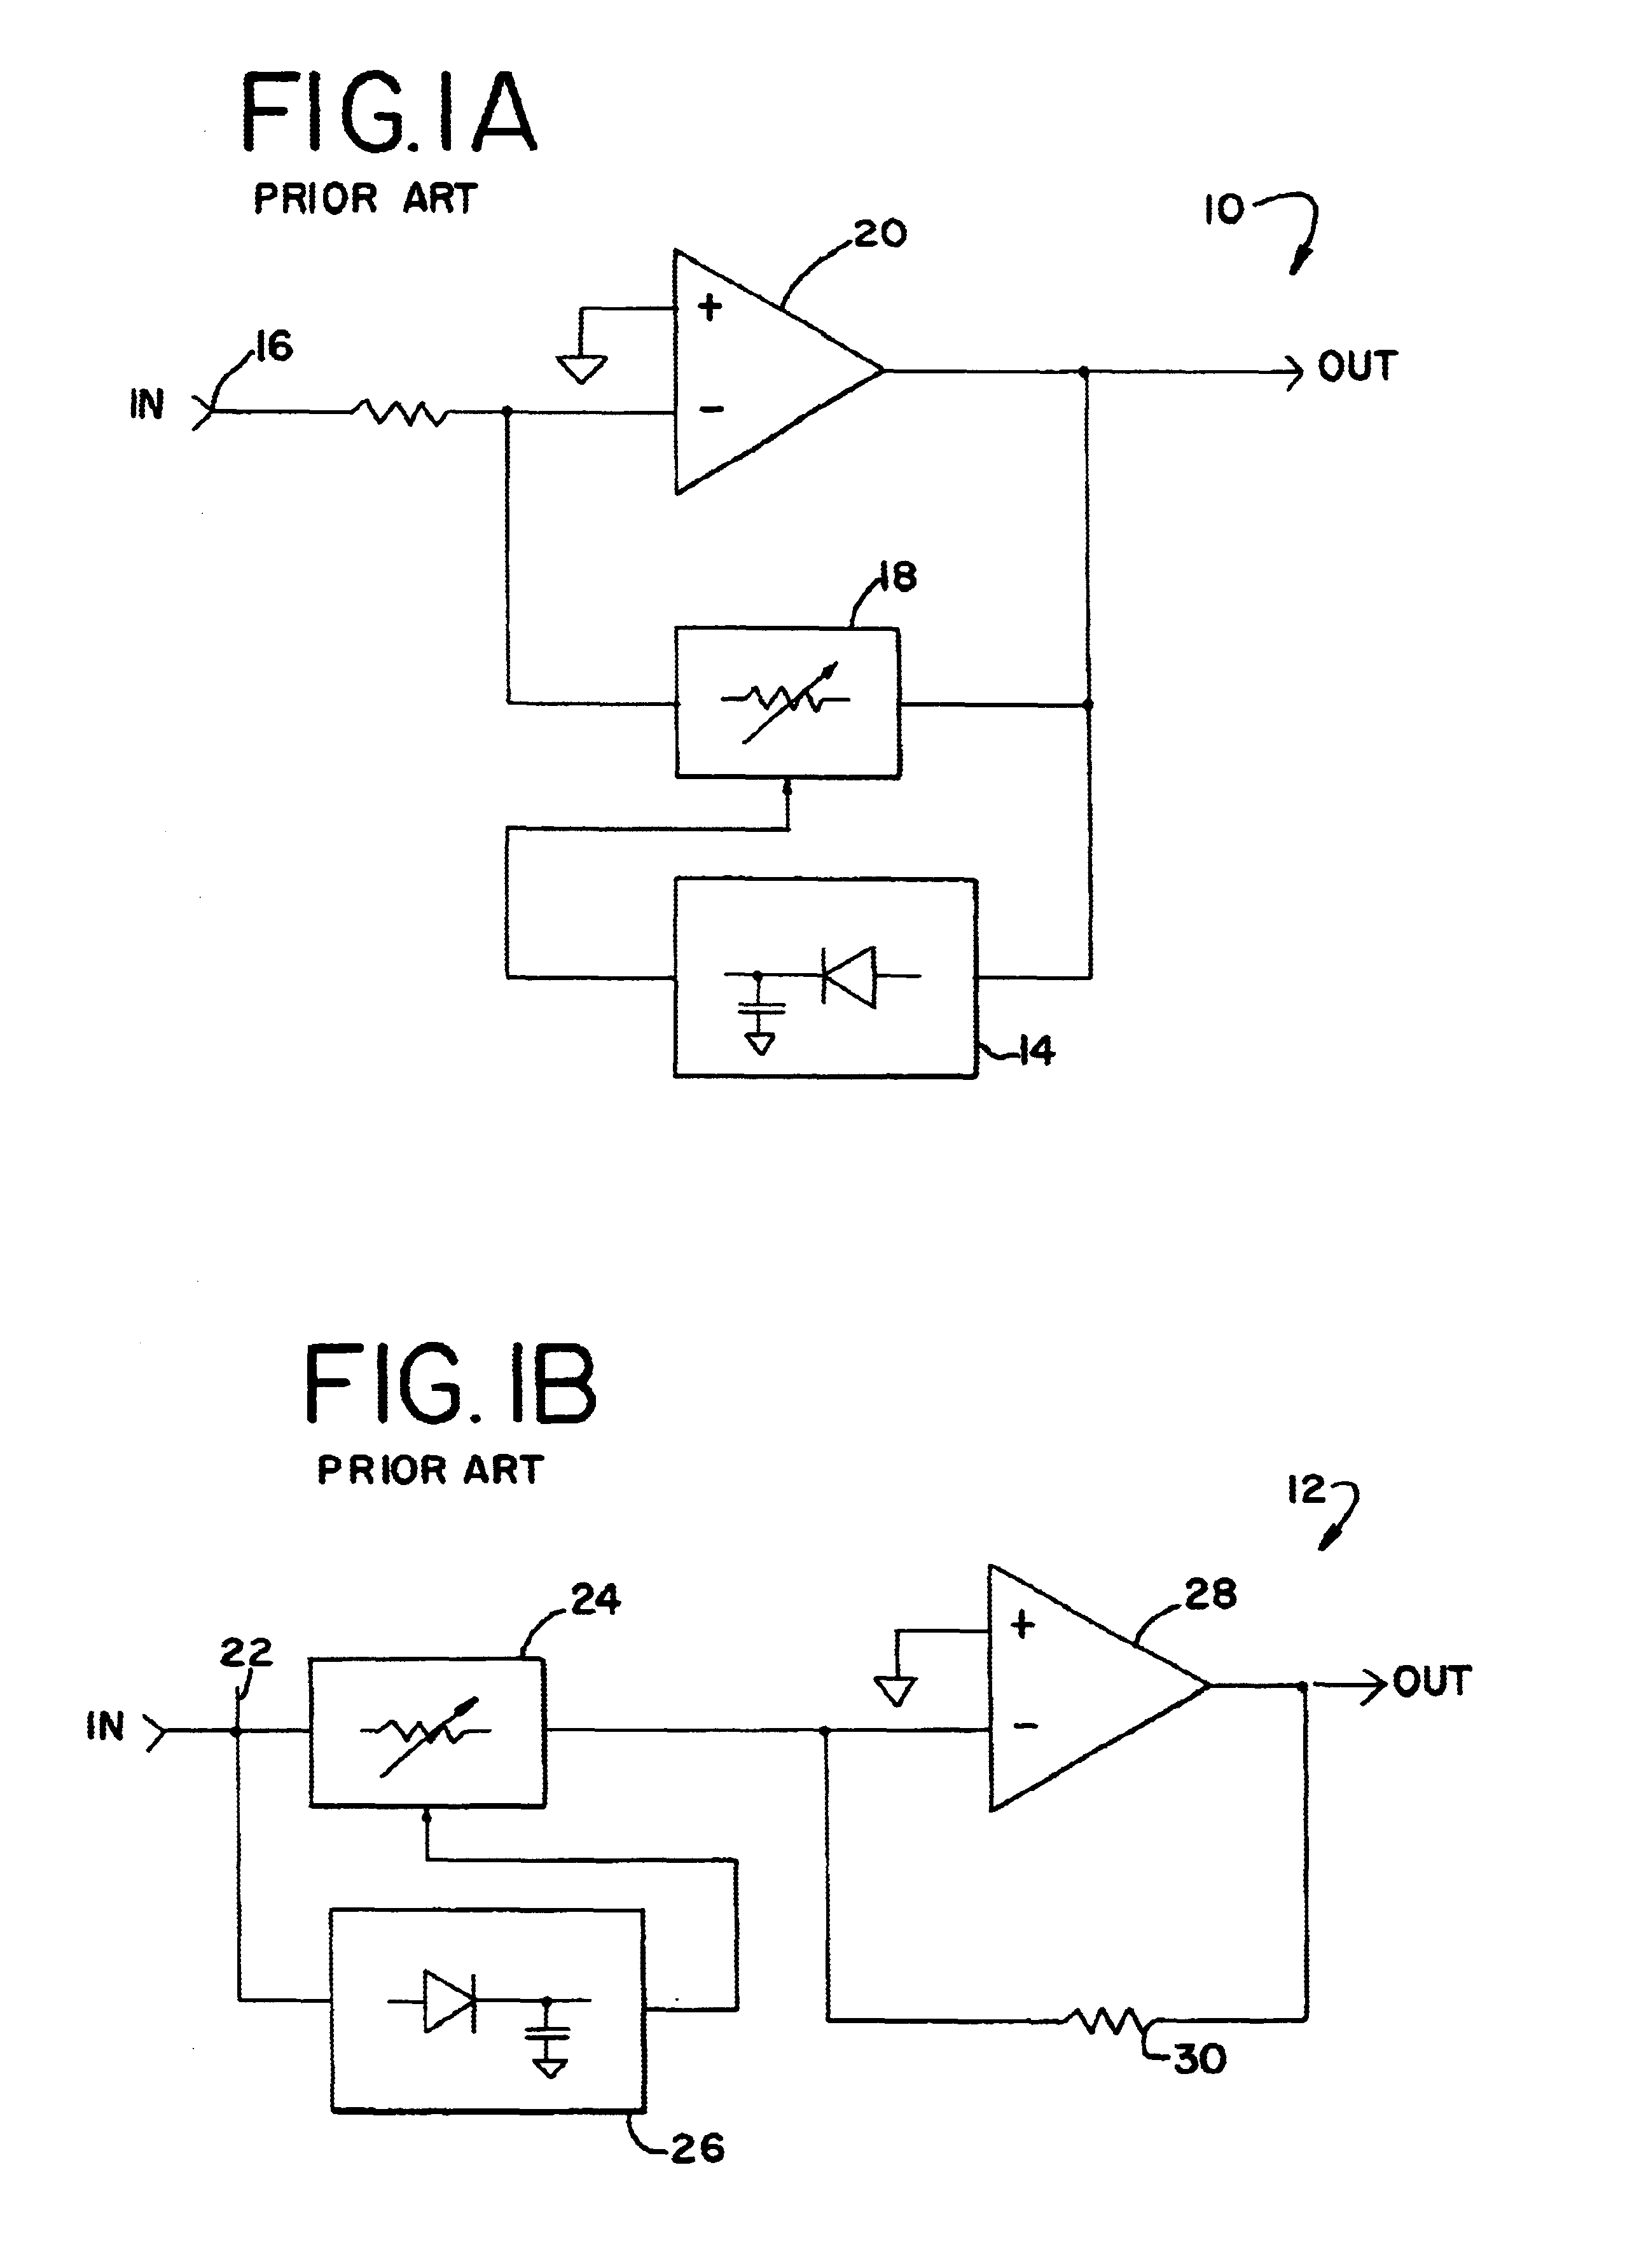 Wireless microphone having a split-band audio frequency companding system that provides improved noise reduction and sound quality